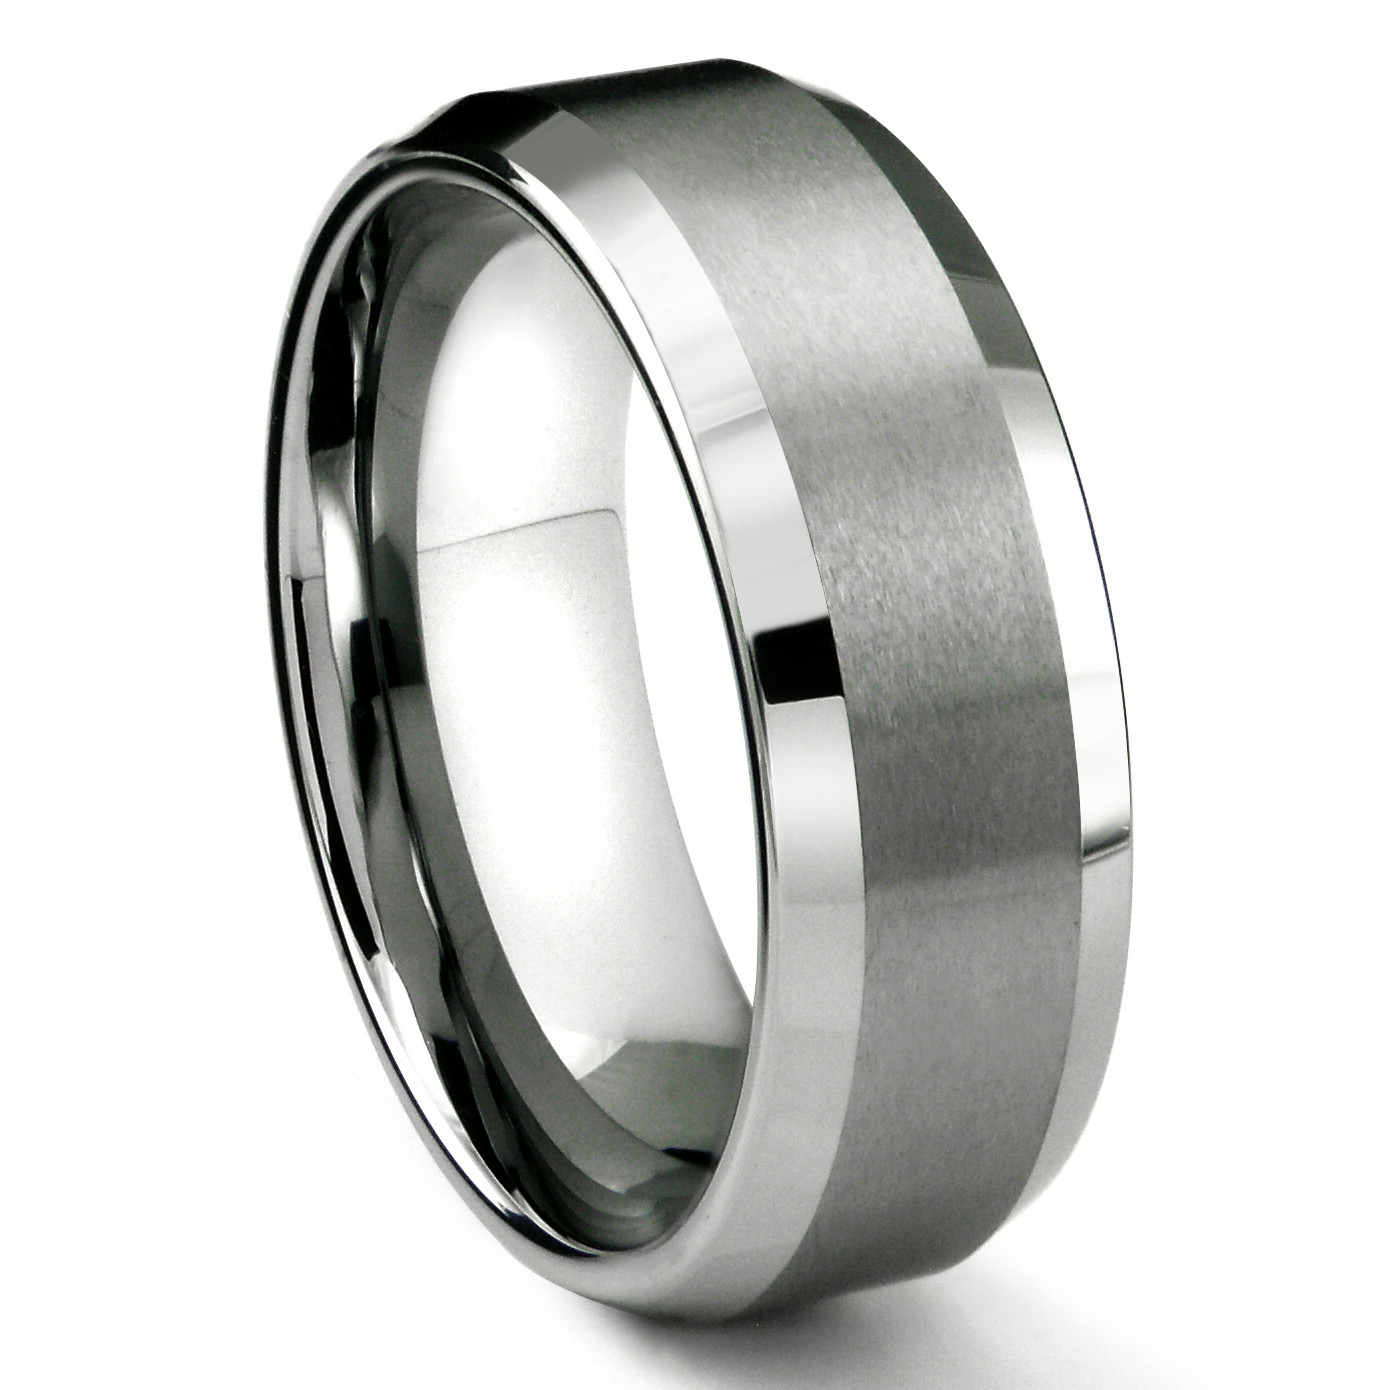 Tungsten Carbide Wedding Ring
 RASORET Tungsten Carbide Ring in fort Fit and Satin Finish